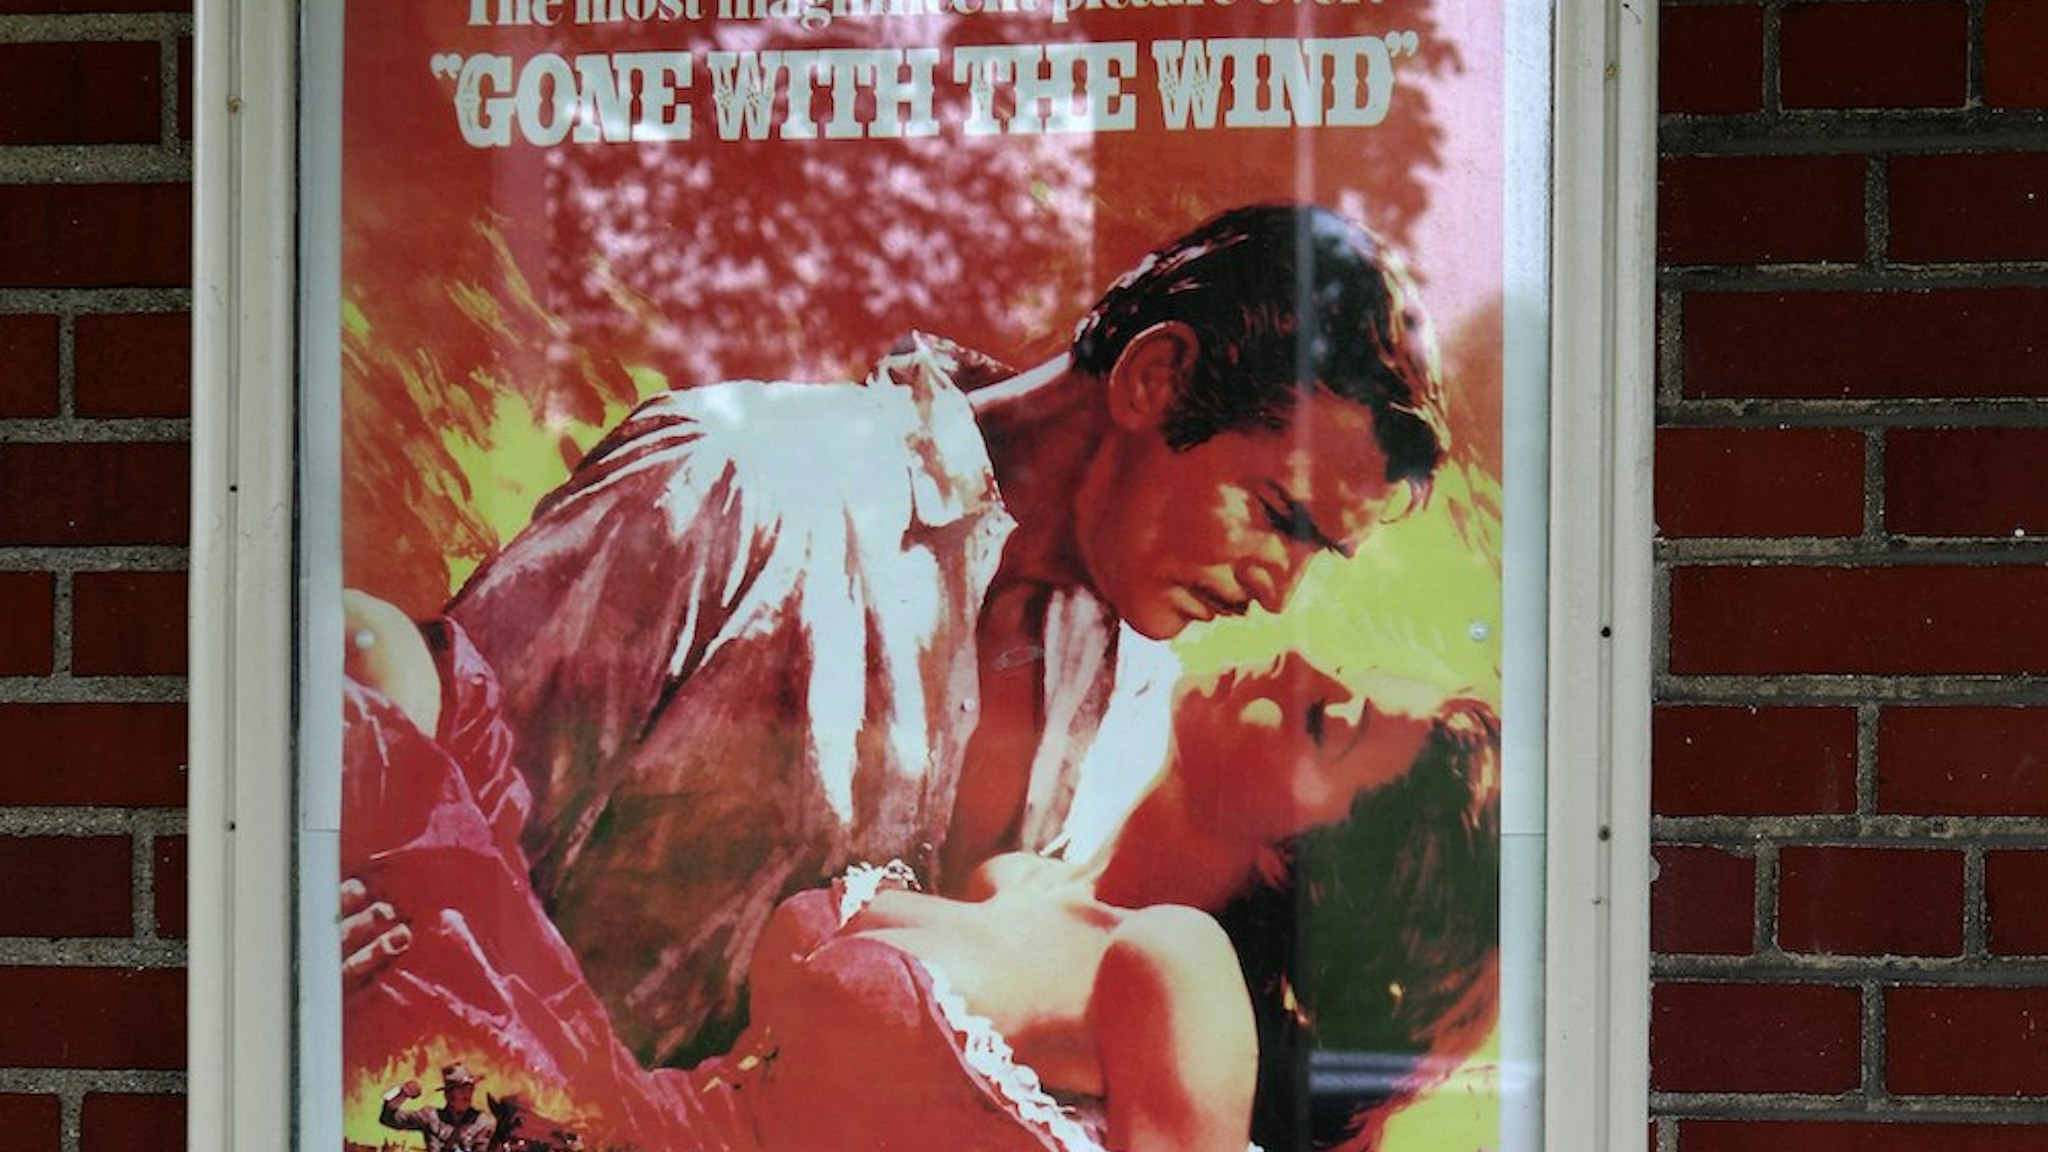 'Gone With The Wind' movie poster displayed outside the Post Theatre, built in 1939 at Historic Fort Wayne in Detroit, Michigan on May 26, 2018. (Photo By Raymond Boyd/Getty Images)